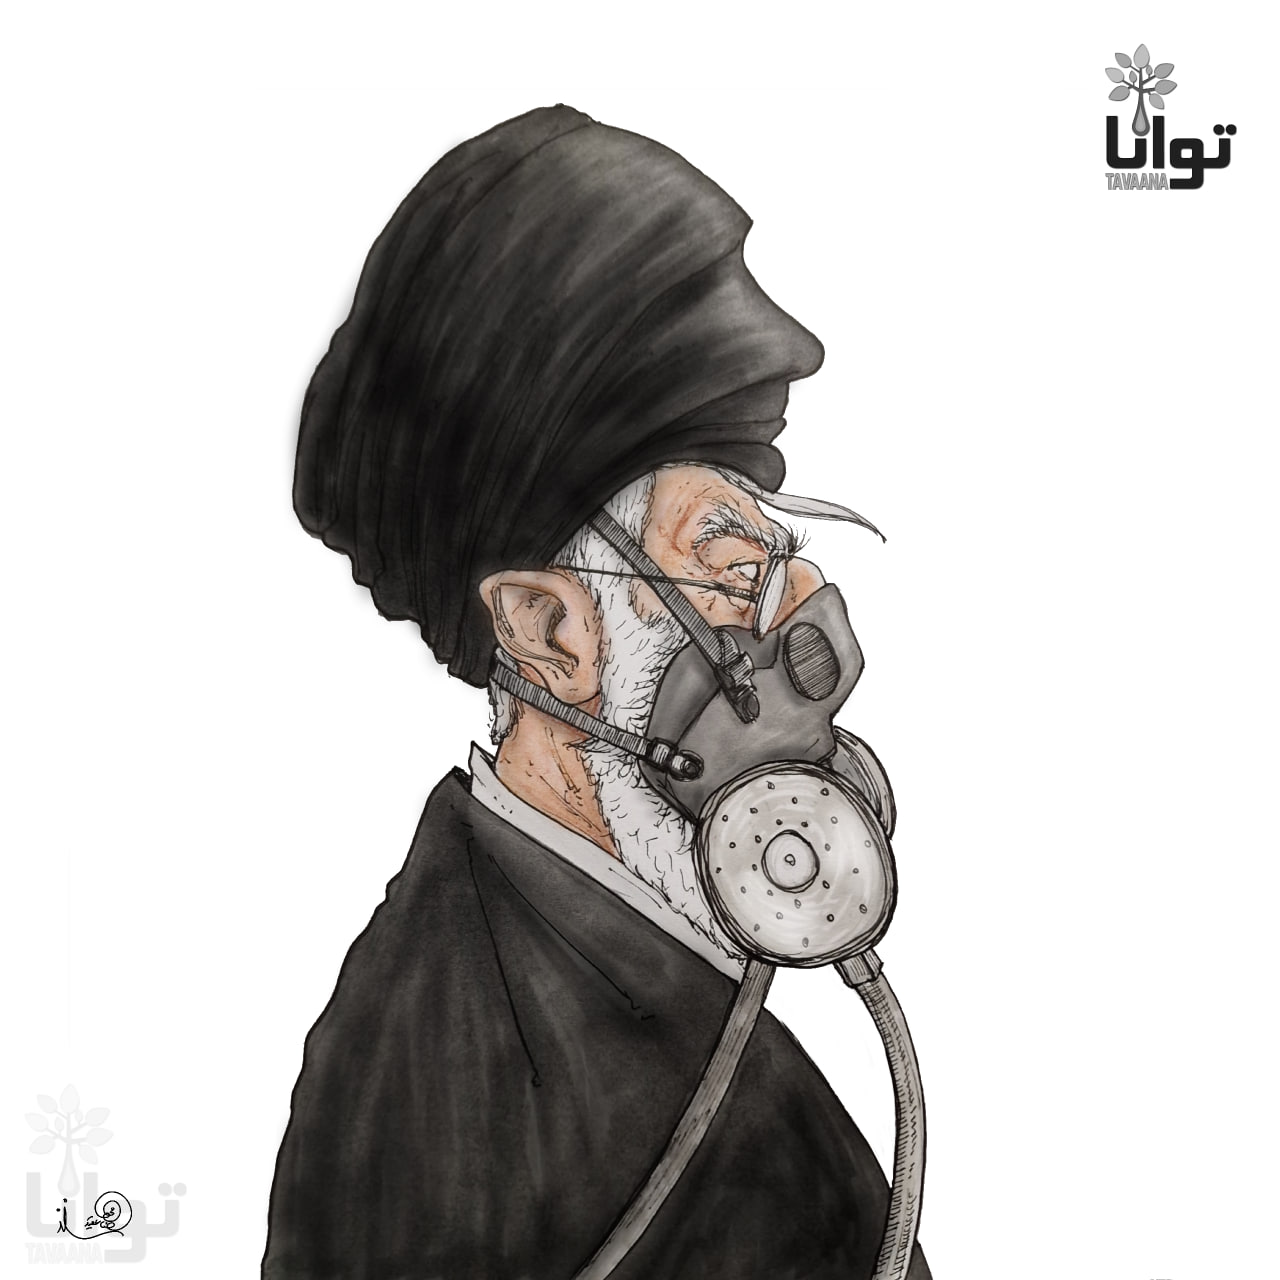 Khamenei-and-chemical-attack-on-students.jpg